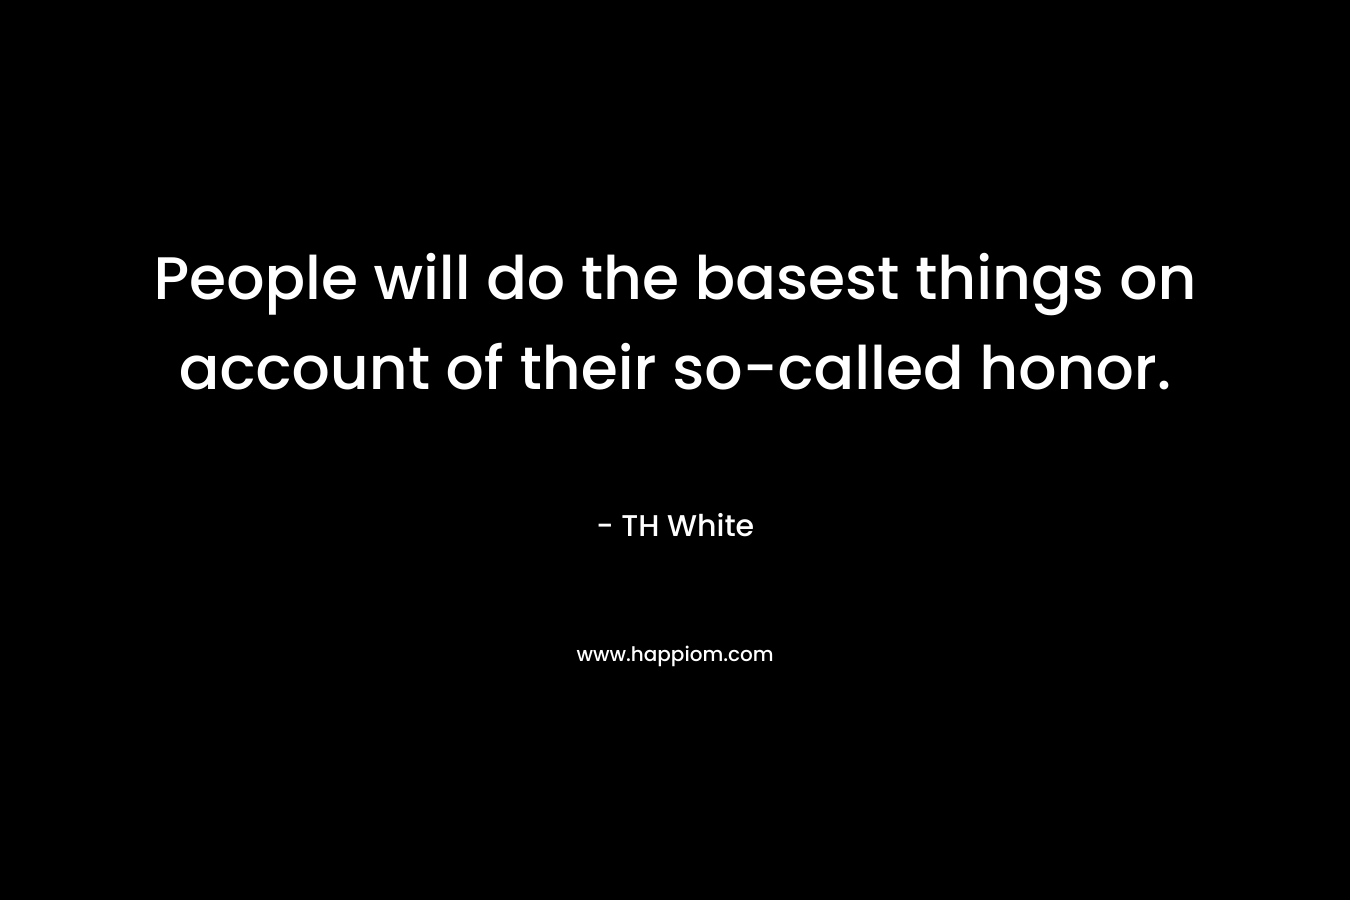 People will do the basest things on account of their so-called honor. – TH White